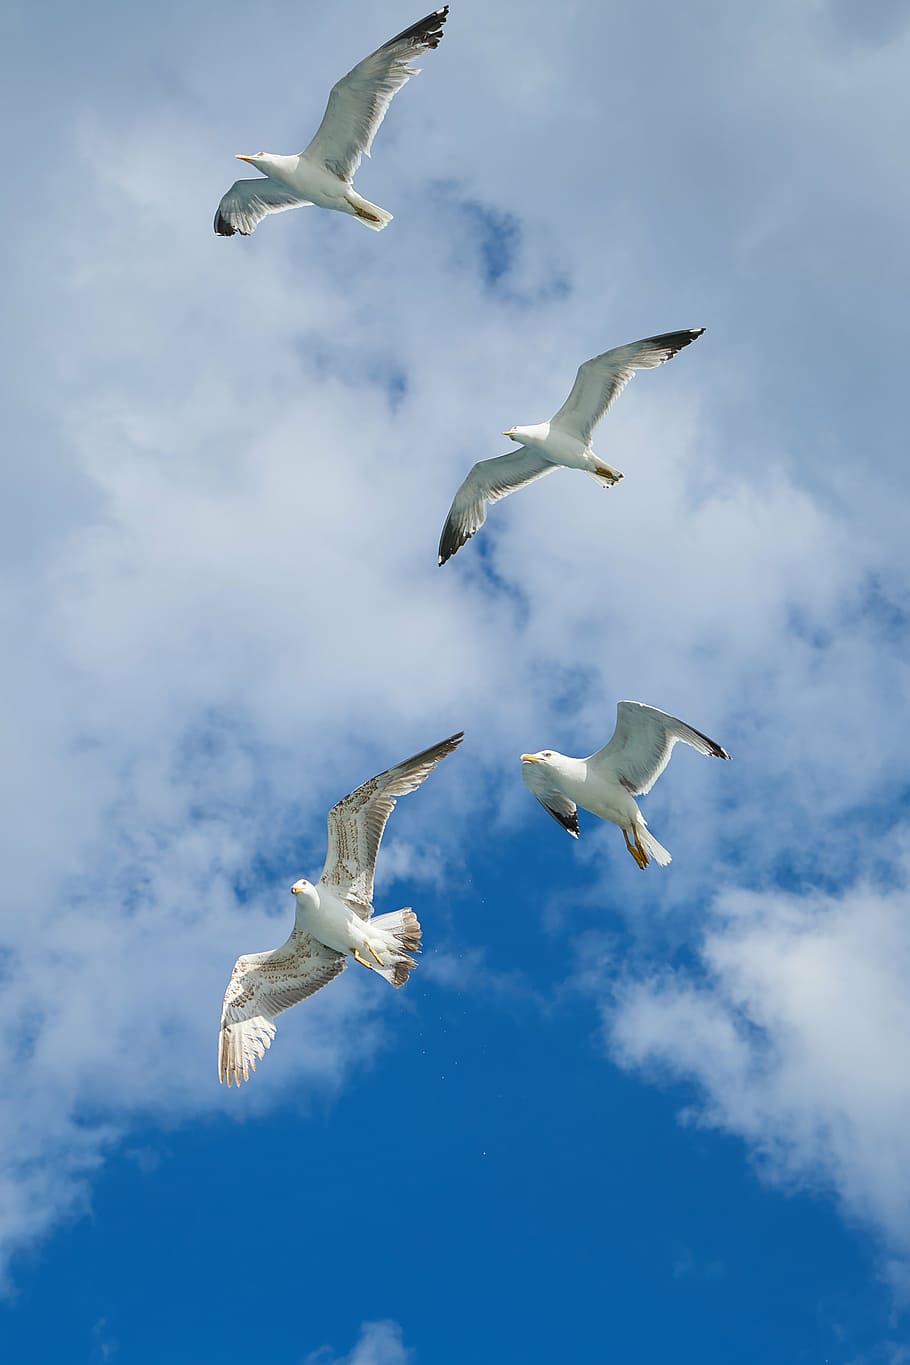 four, flying, white, birds, seagull, bird, wing, blue, nature, clouds